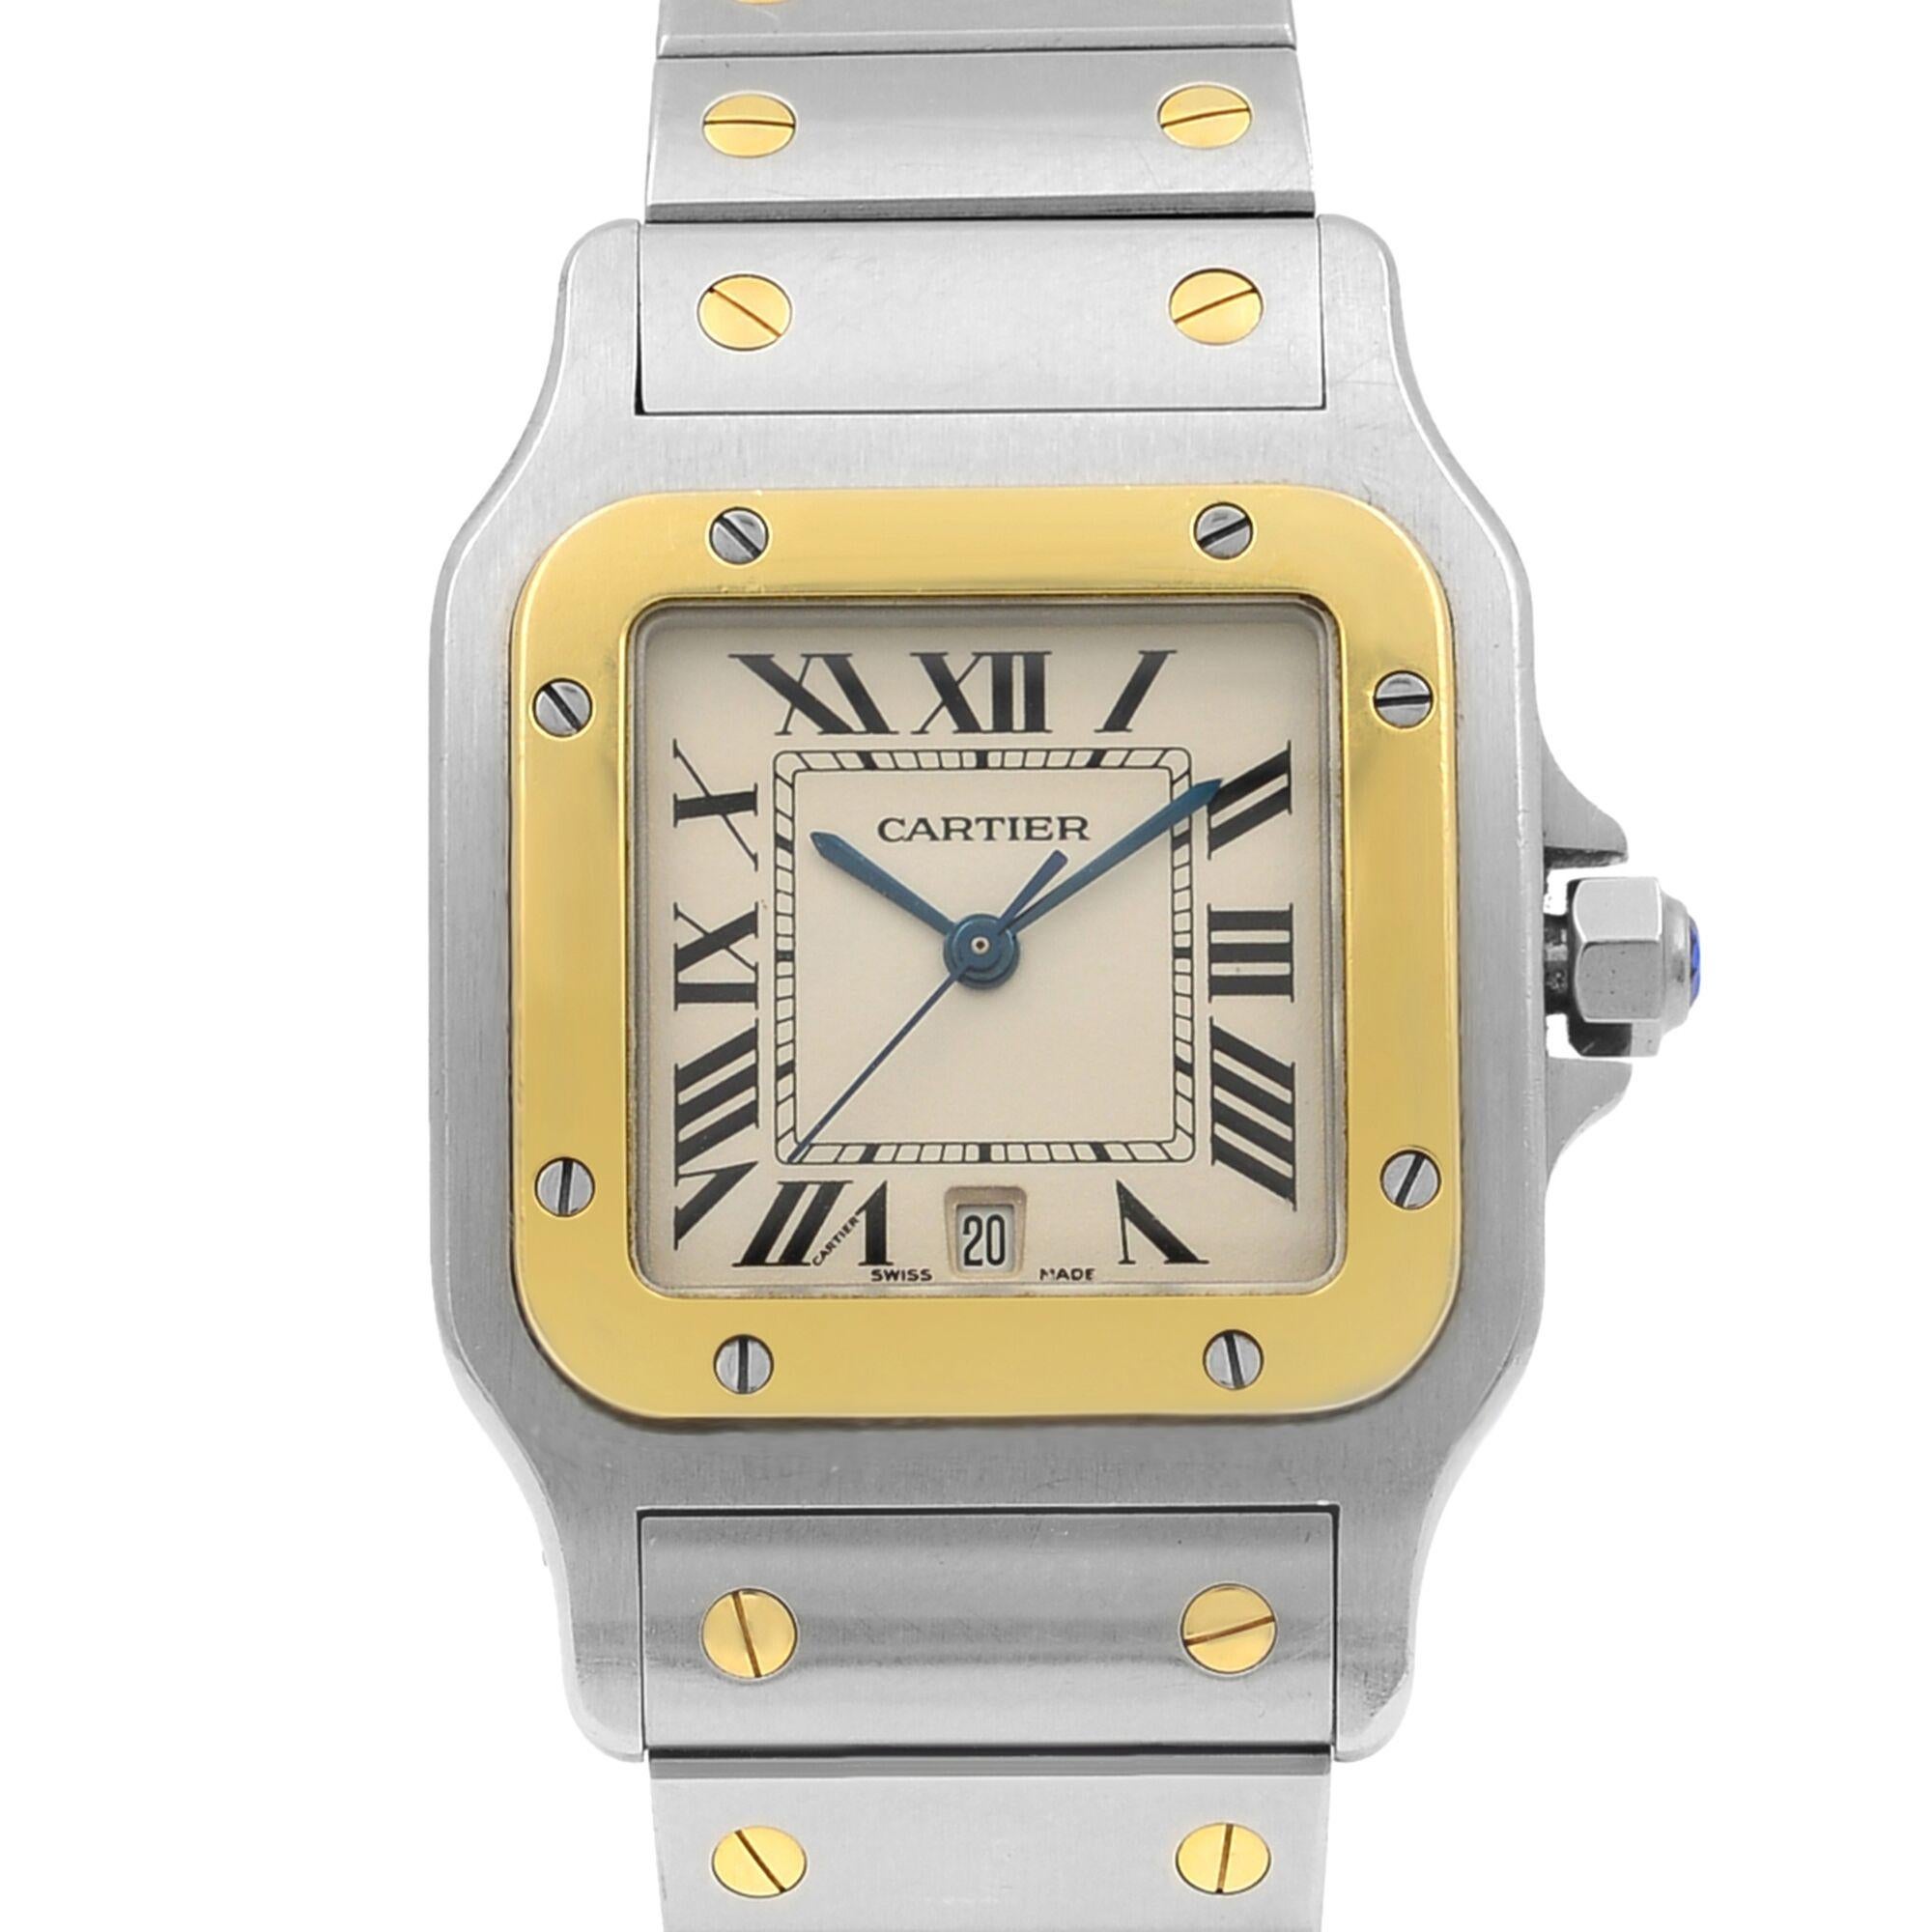 Pre-Owned Like New Cartier Santos Galbee Stainless Steel Gold White Dial Unisex Quartz Watch 1566. This Beautiful Timepiece is Powered by Quartz (Battery) Movement And Features: Stainless Steel Case with a Stainless Steel Bracelet with 2 Gold